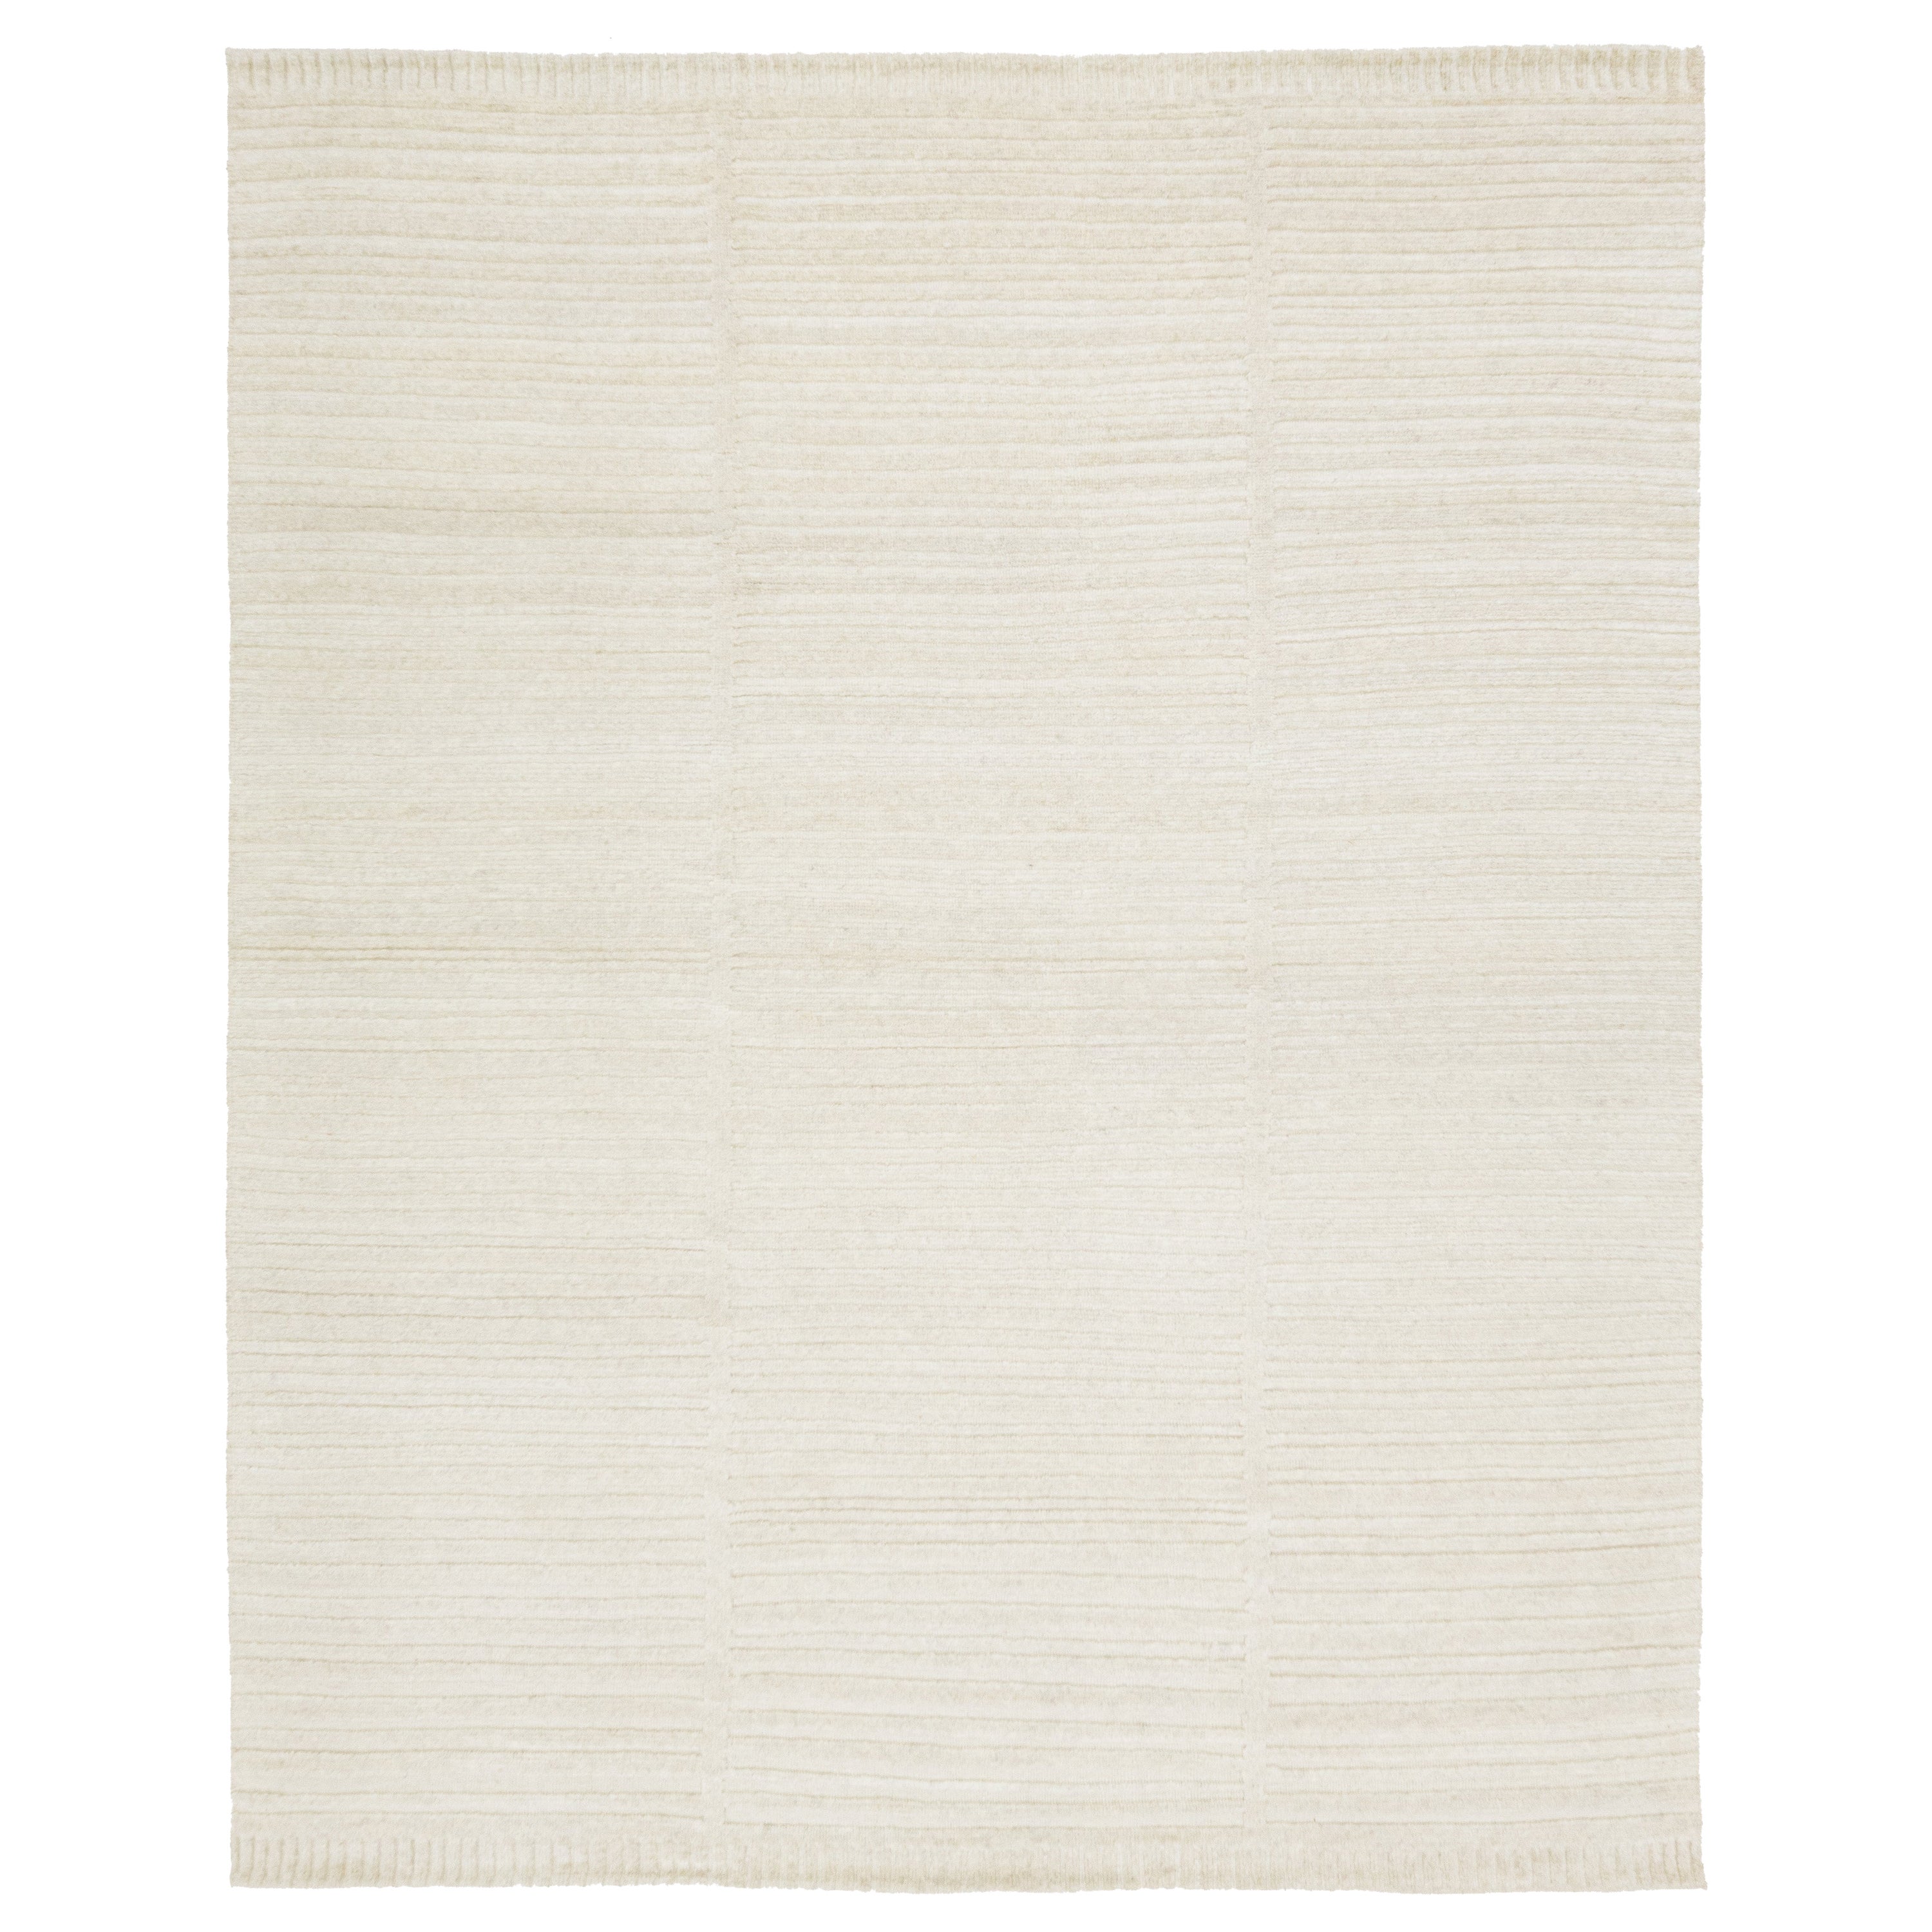 Contemporary Moroccan Style Organic Ivory Wool Rug By Apadana For Sale